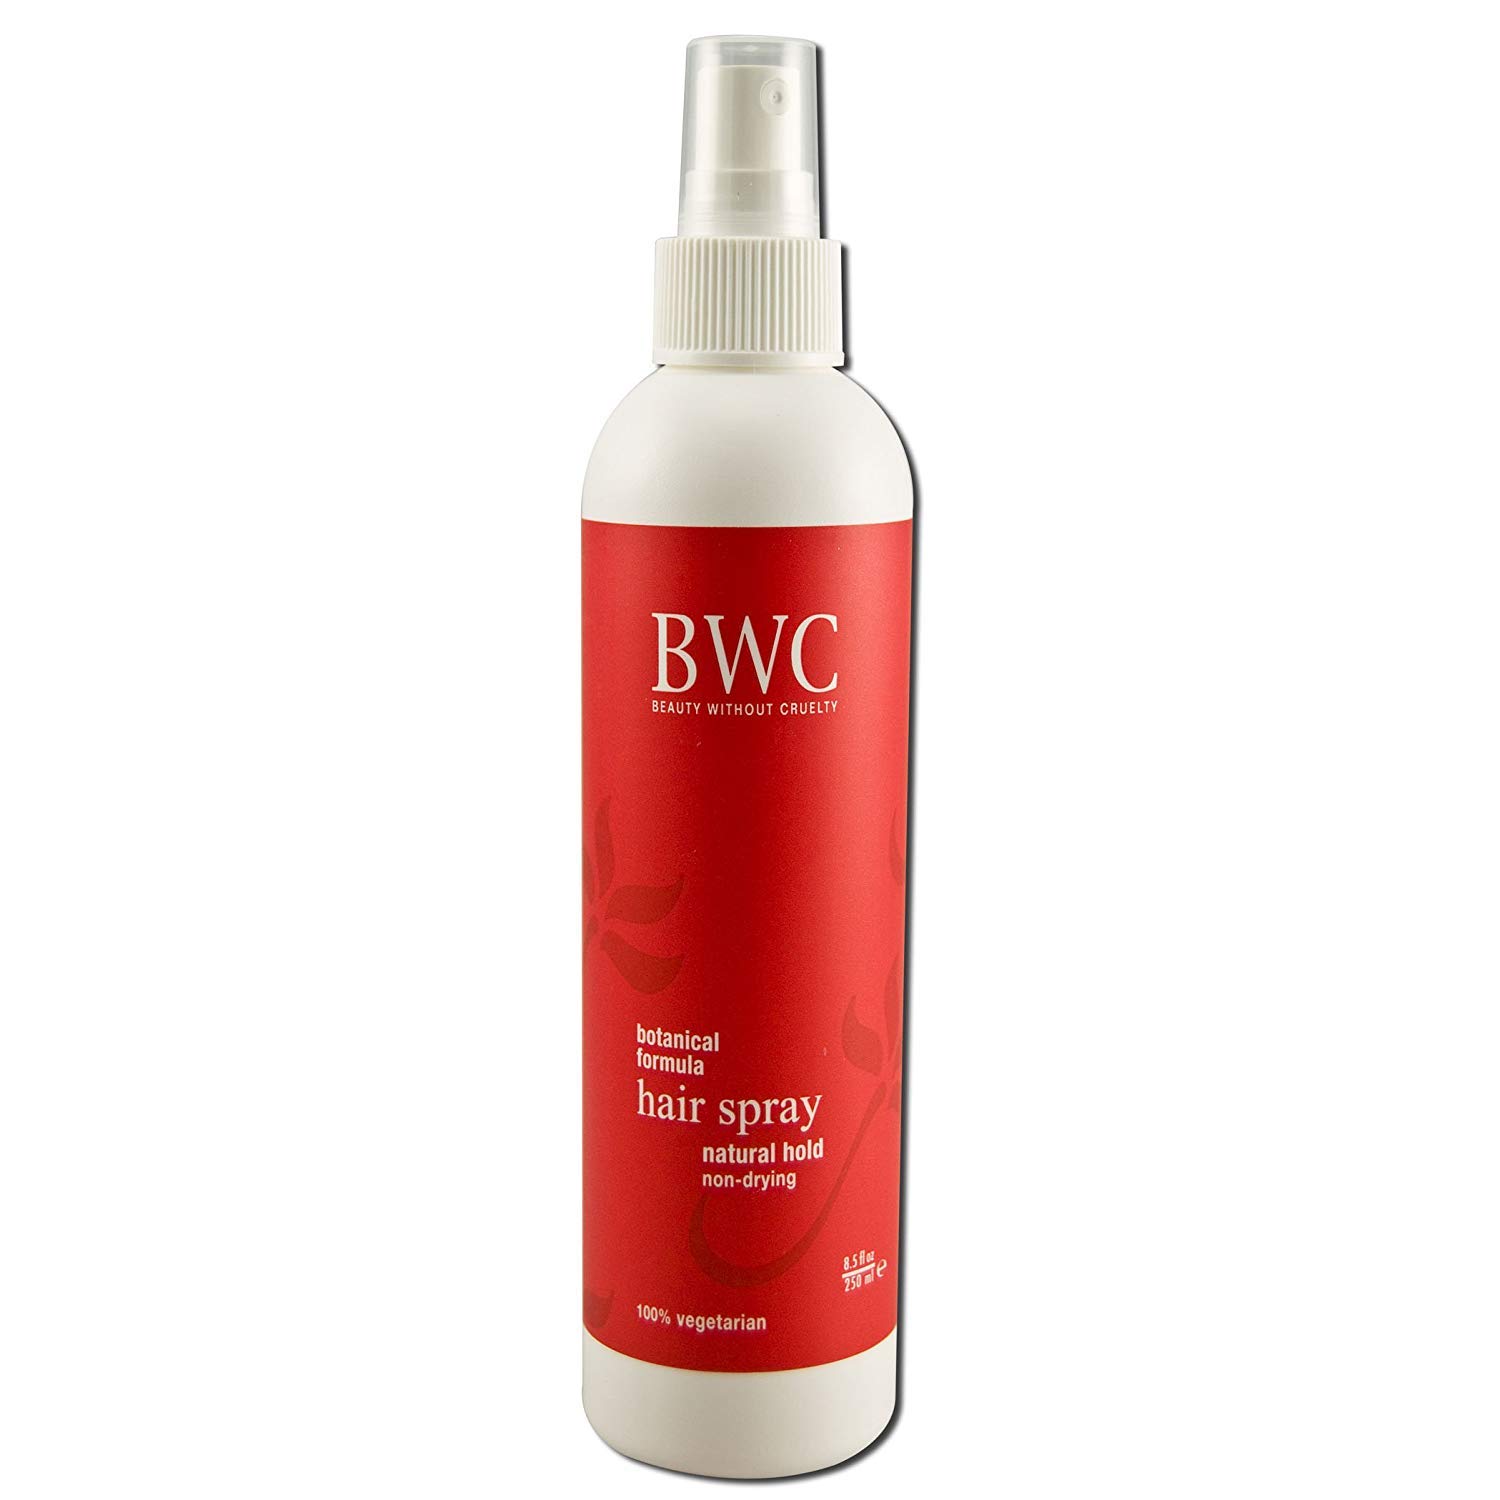 Beauty Without Cruelty Natural Hold Hair Spray, 8.5 Ounce - 6 per case.